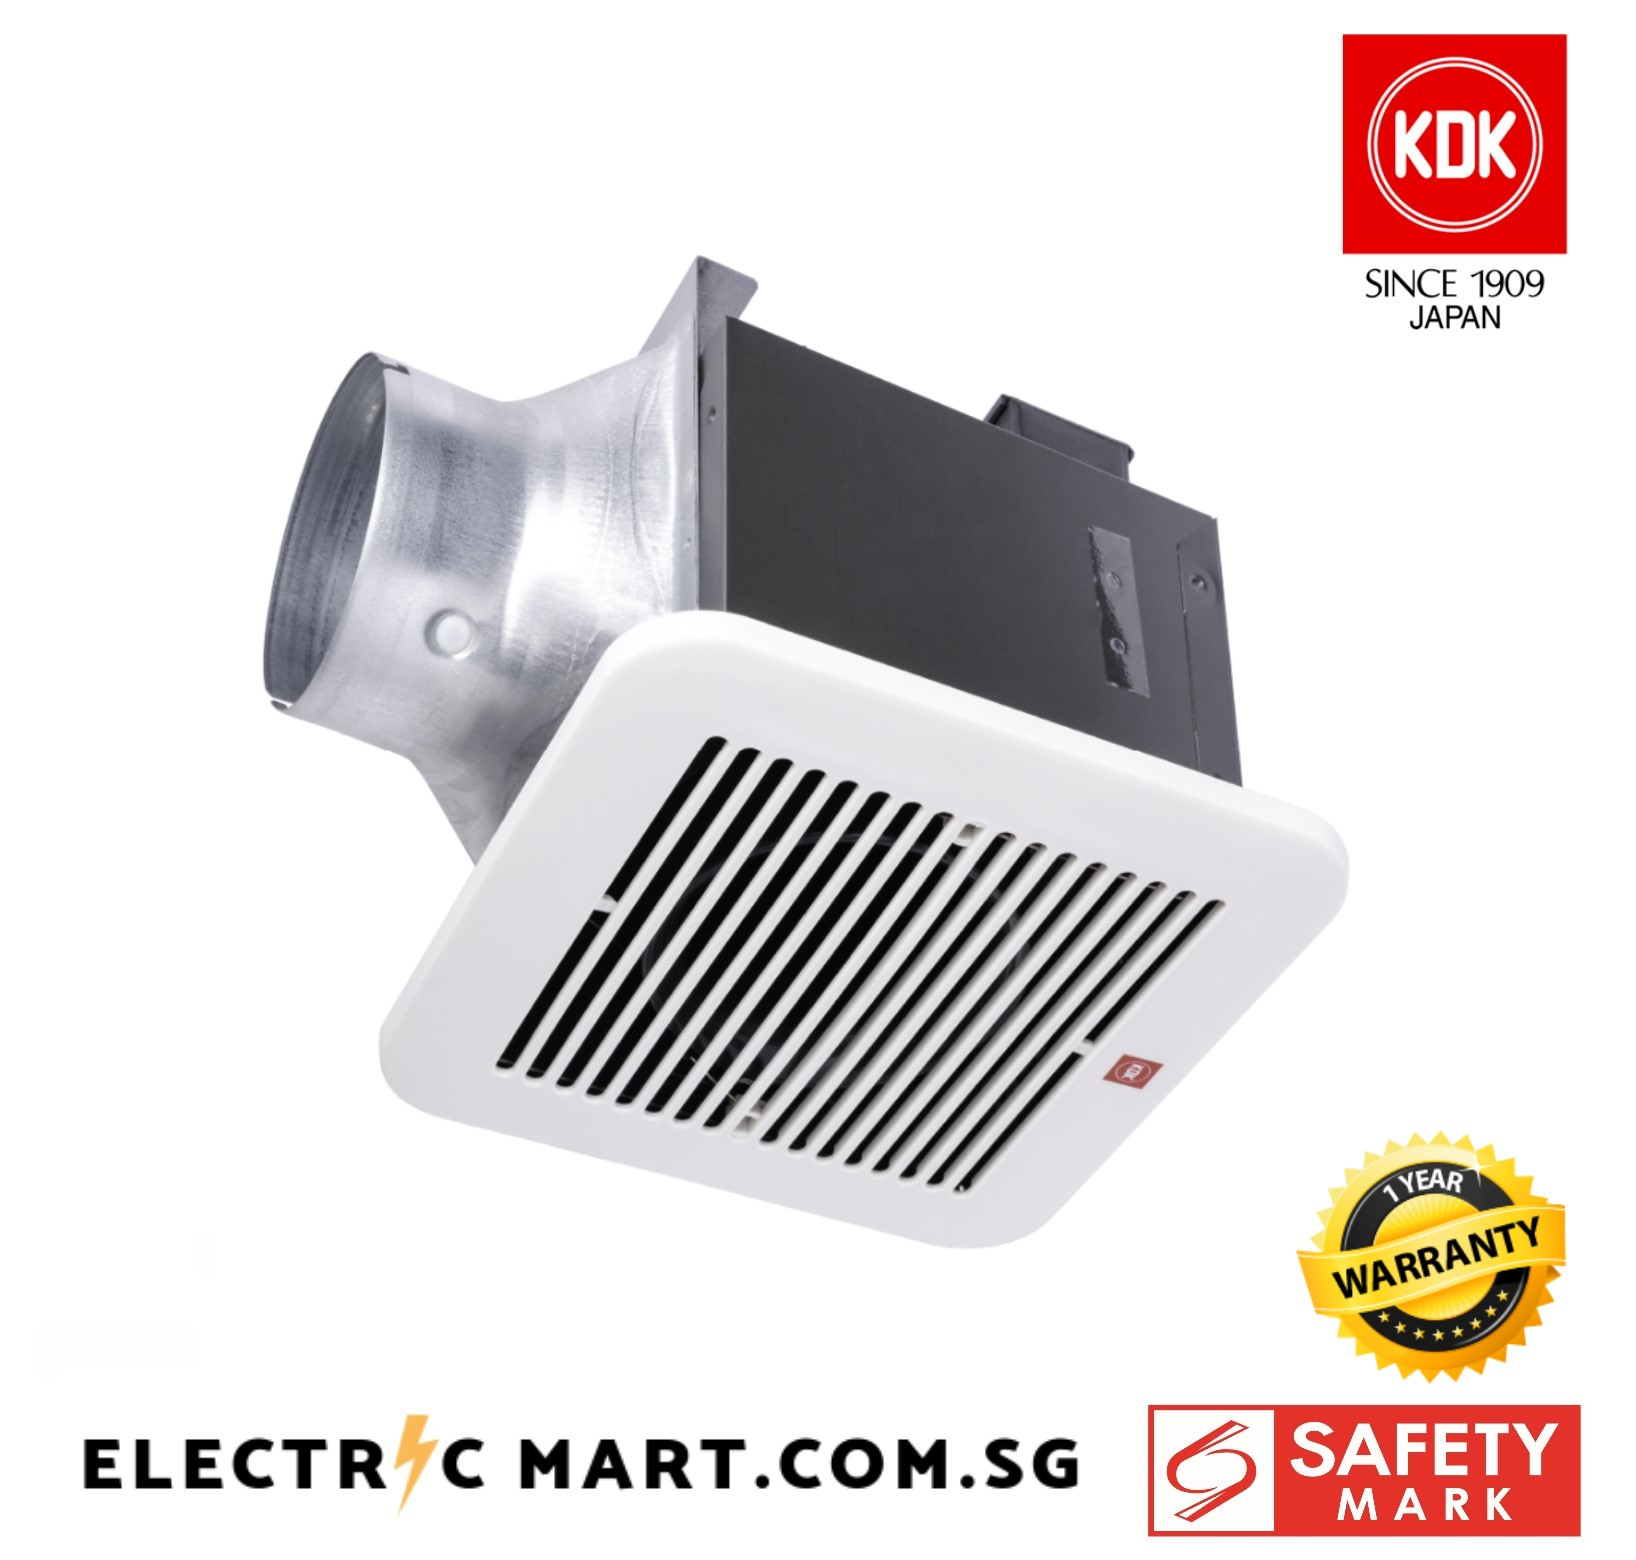 Kdk 17cug 17cm Ceiling Mount Ventilating Exhaust Fan pertaining to dimensions 1636 X 1560